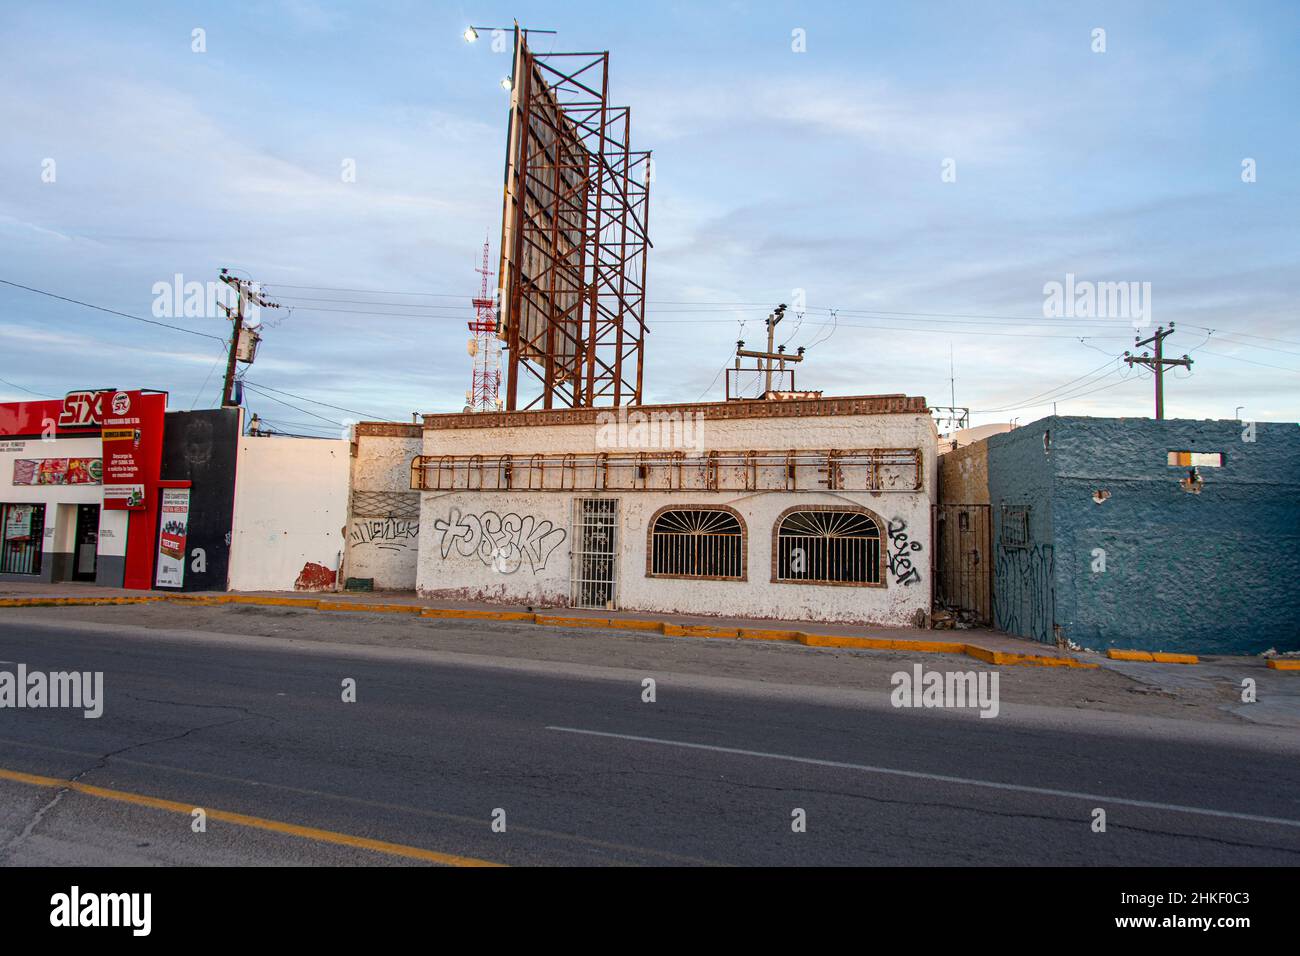 An abandoned business whose owner could no longer afford the rent due to a bad economy, Puerto Penasco, Mexico. Stock Photo